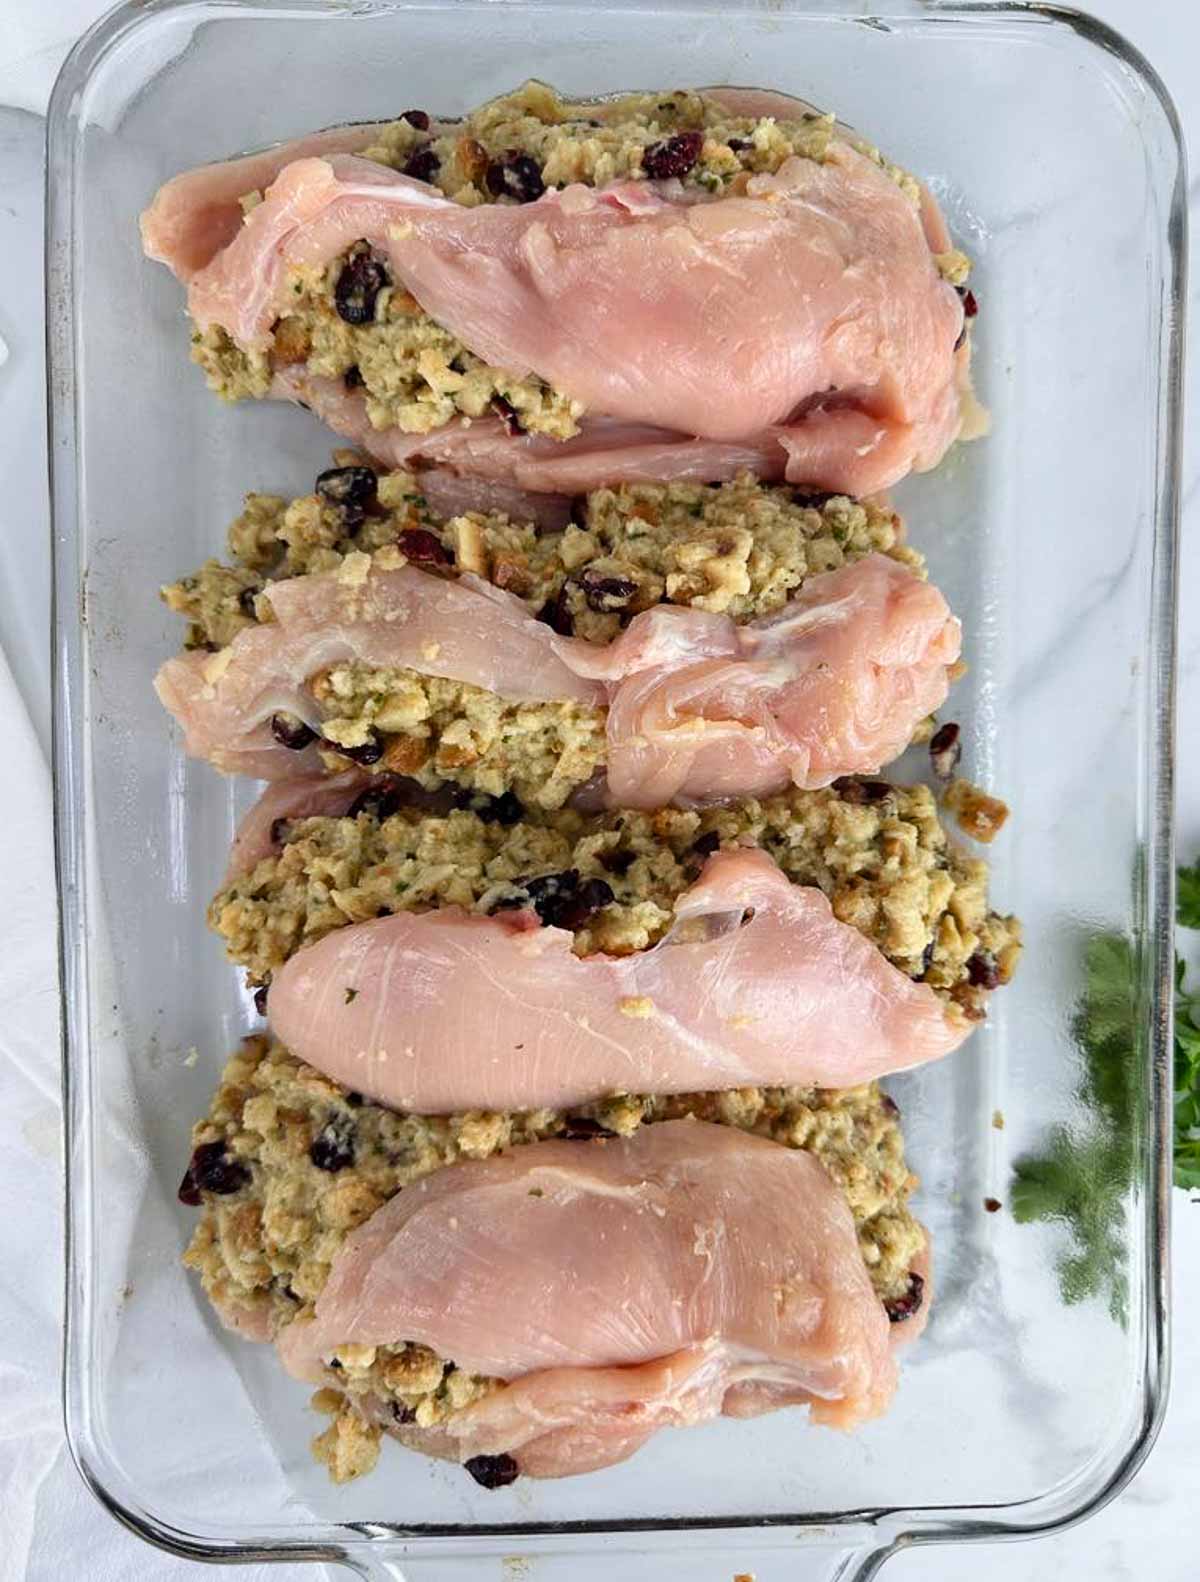 Stuff each chicken breast with one quarter of the stuffing and put the stuffed chicken breasts into a baking dish